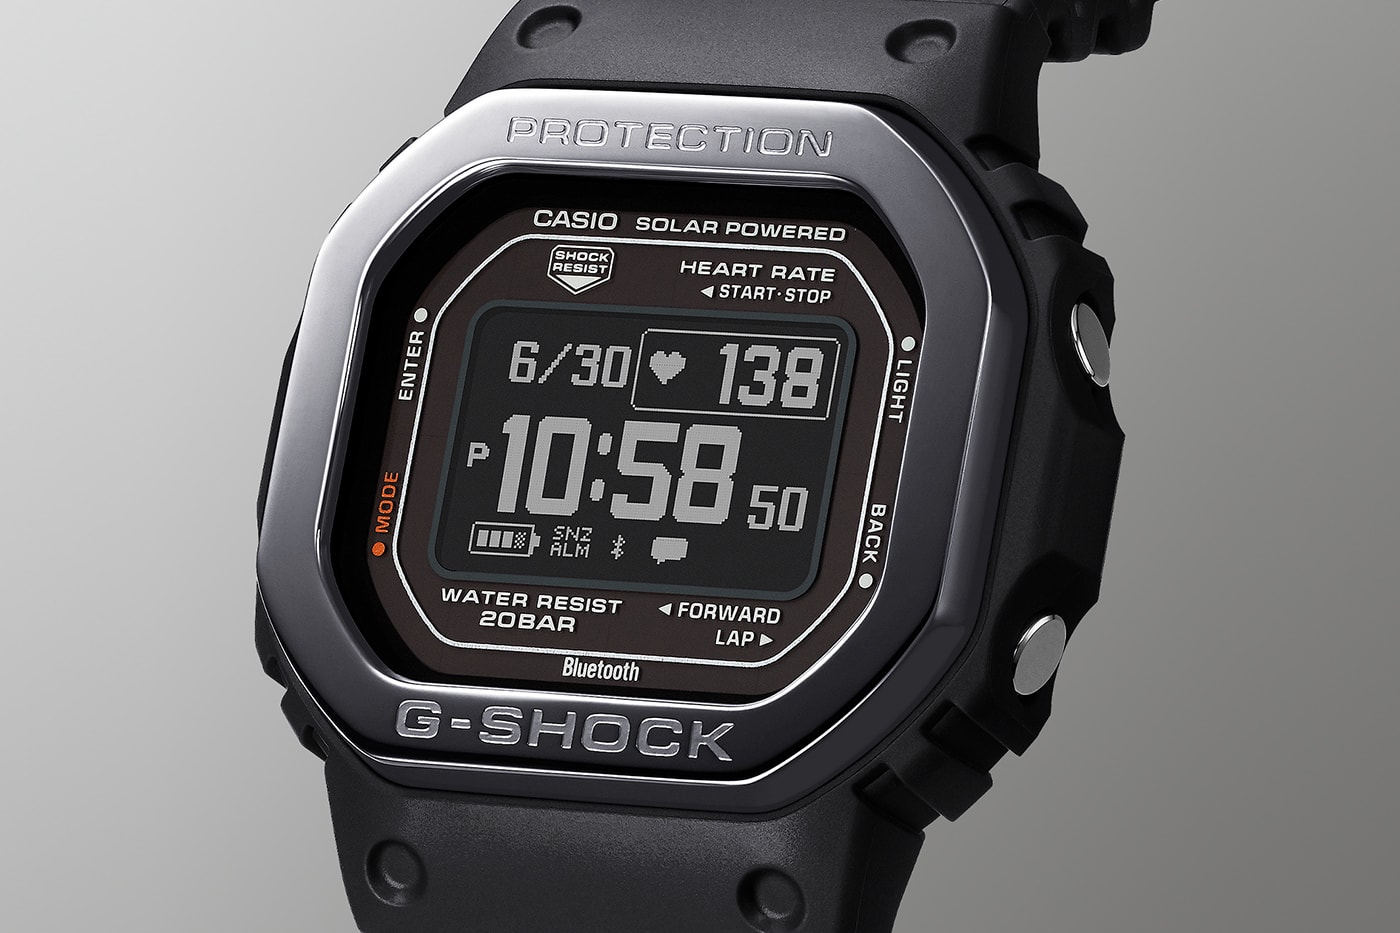 G-SHOCK G-SQUAD DW-H5600 Watch Release Info